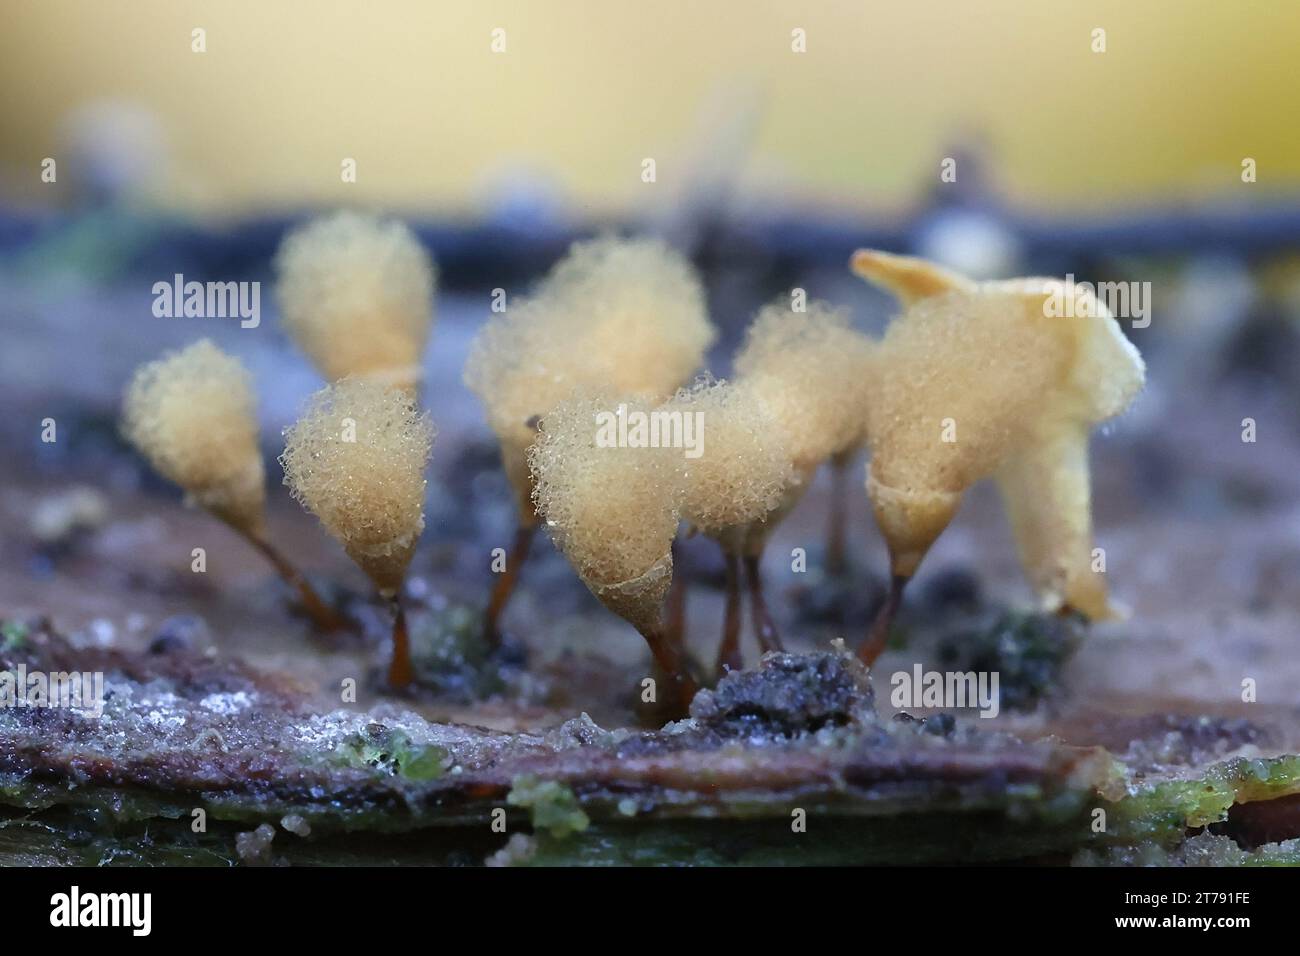 Hemitrichia calyculata, commonly known as push pin slime mold Stock Photo